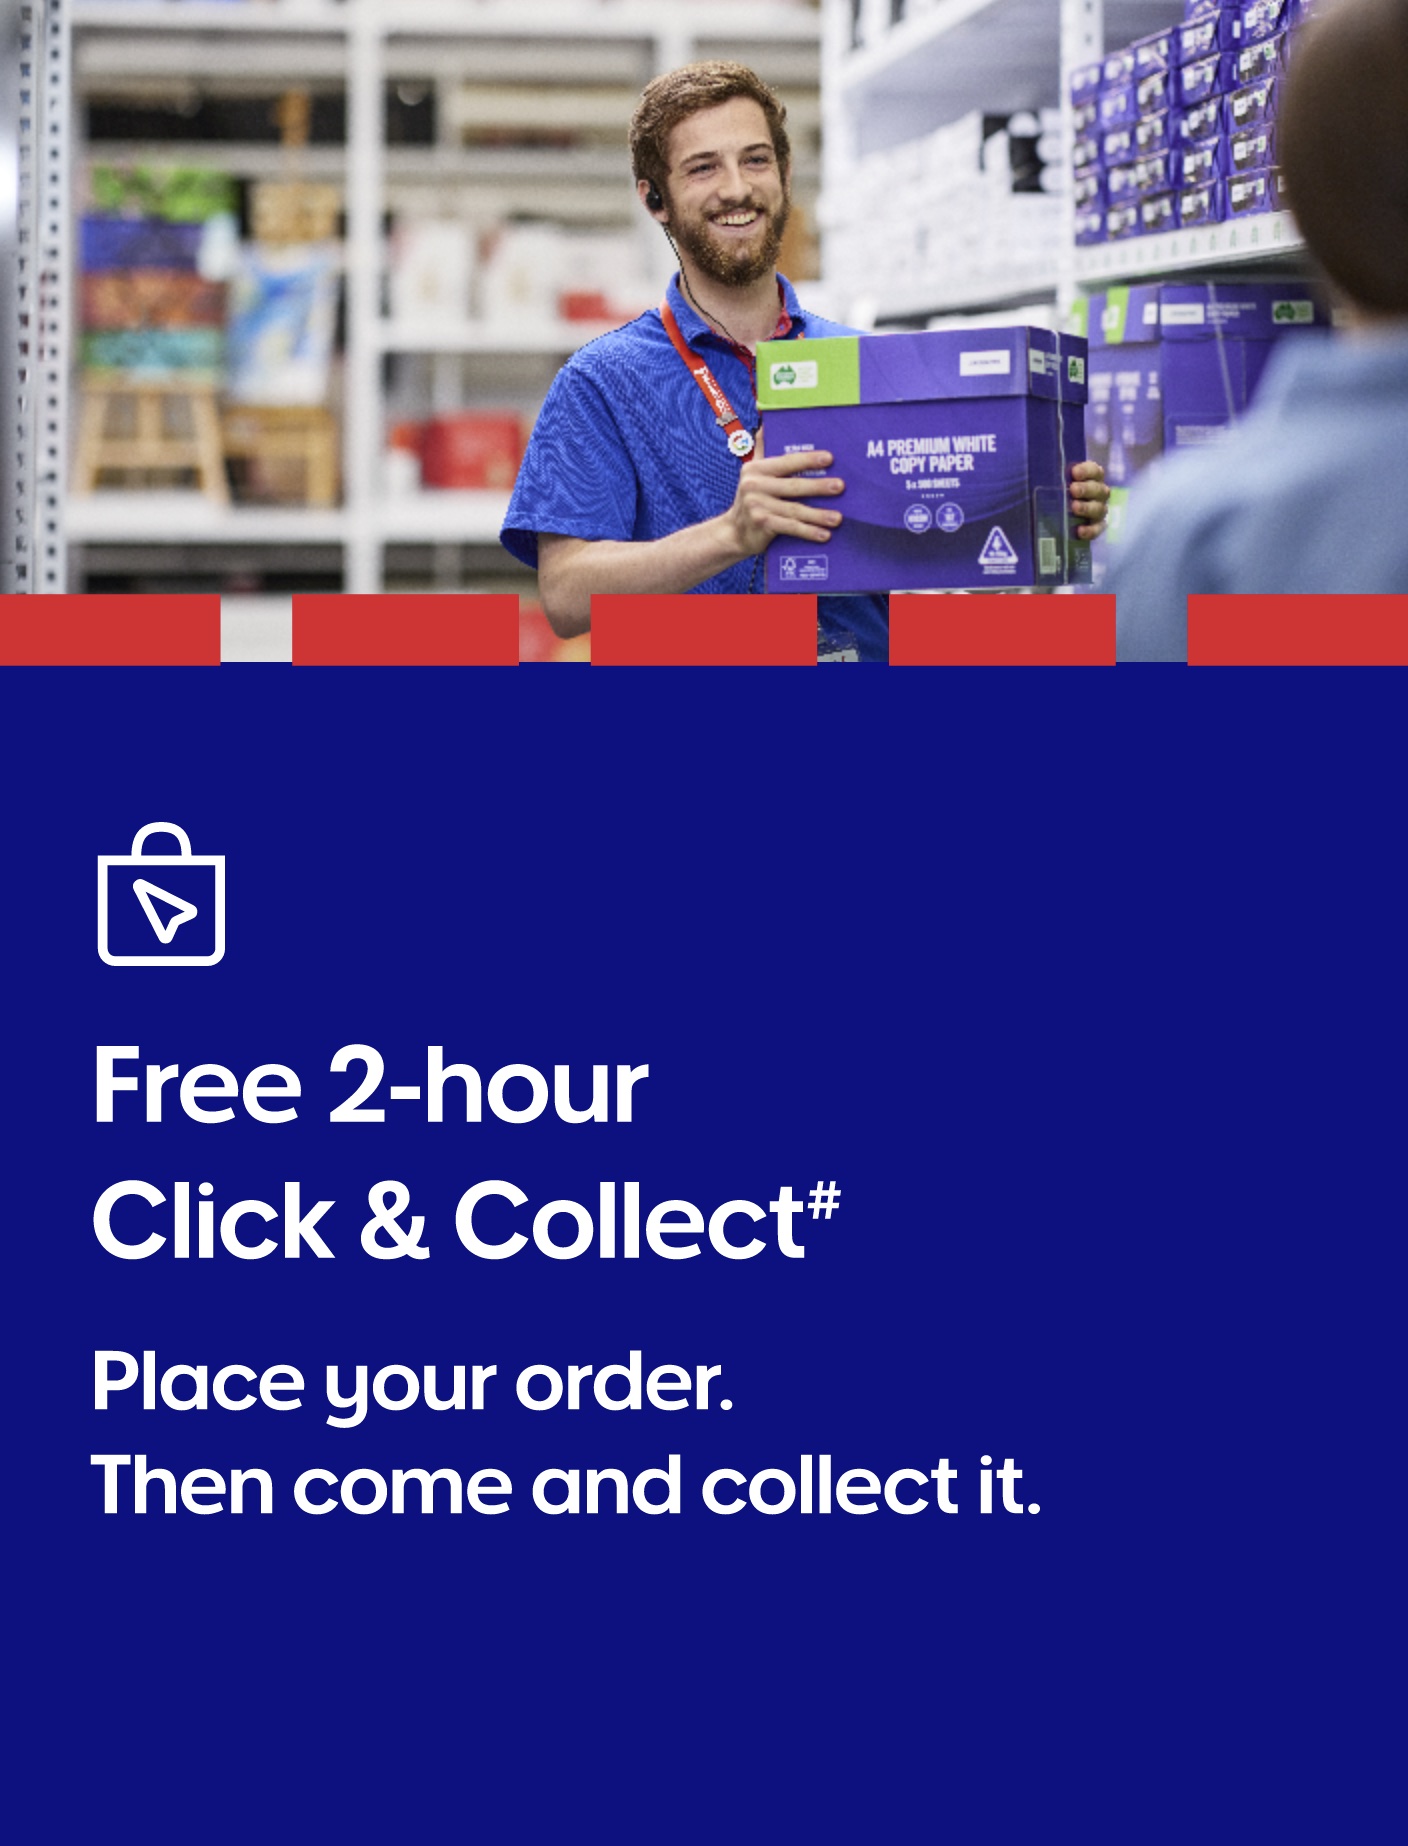 Coles Catalogue — Click and Collect